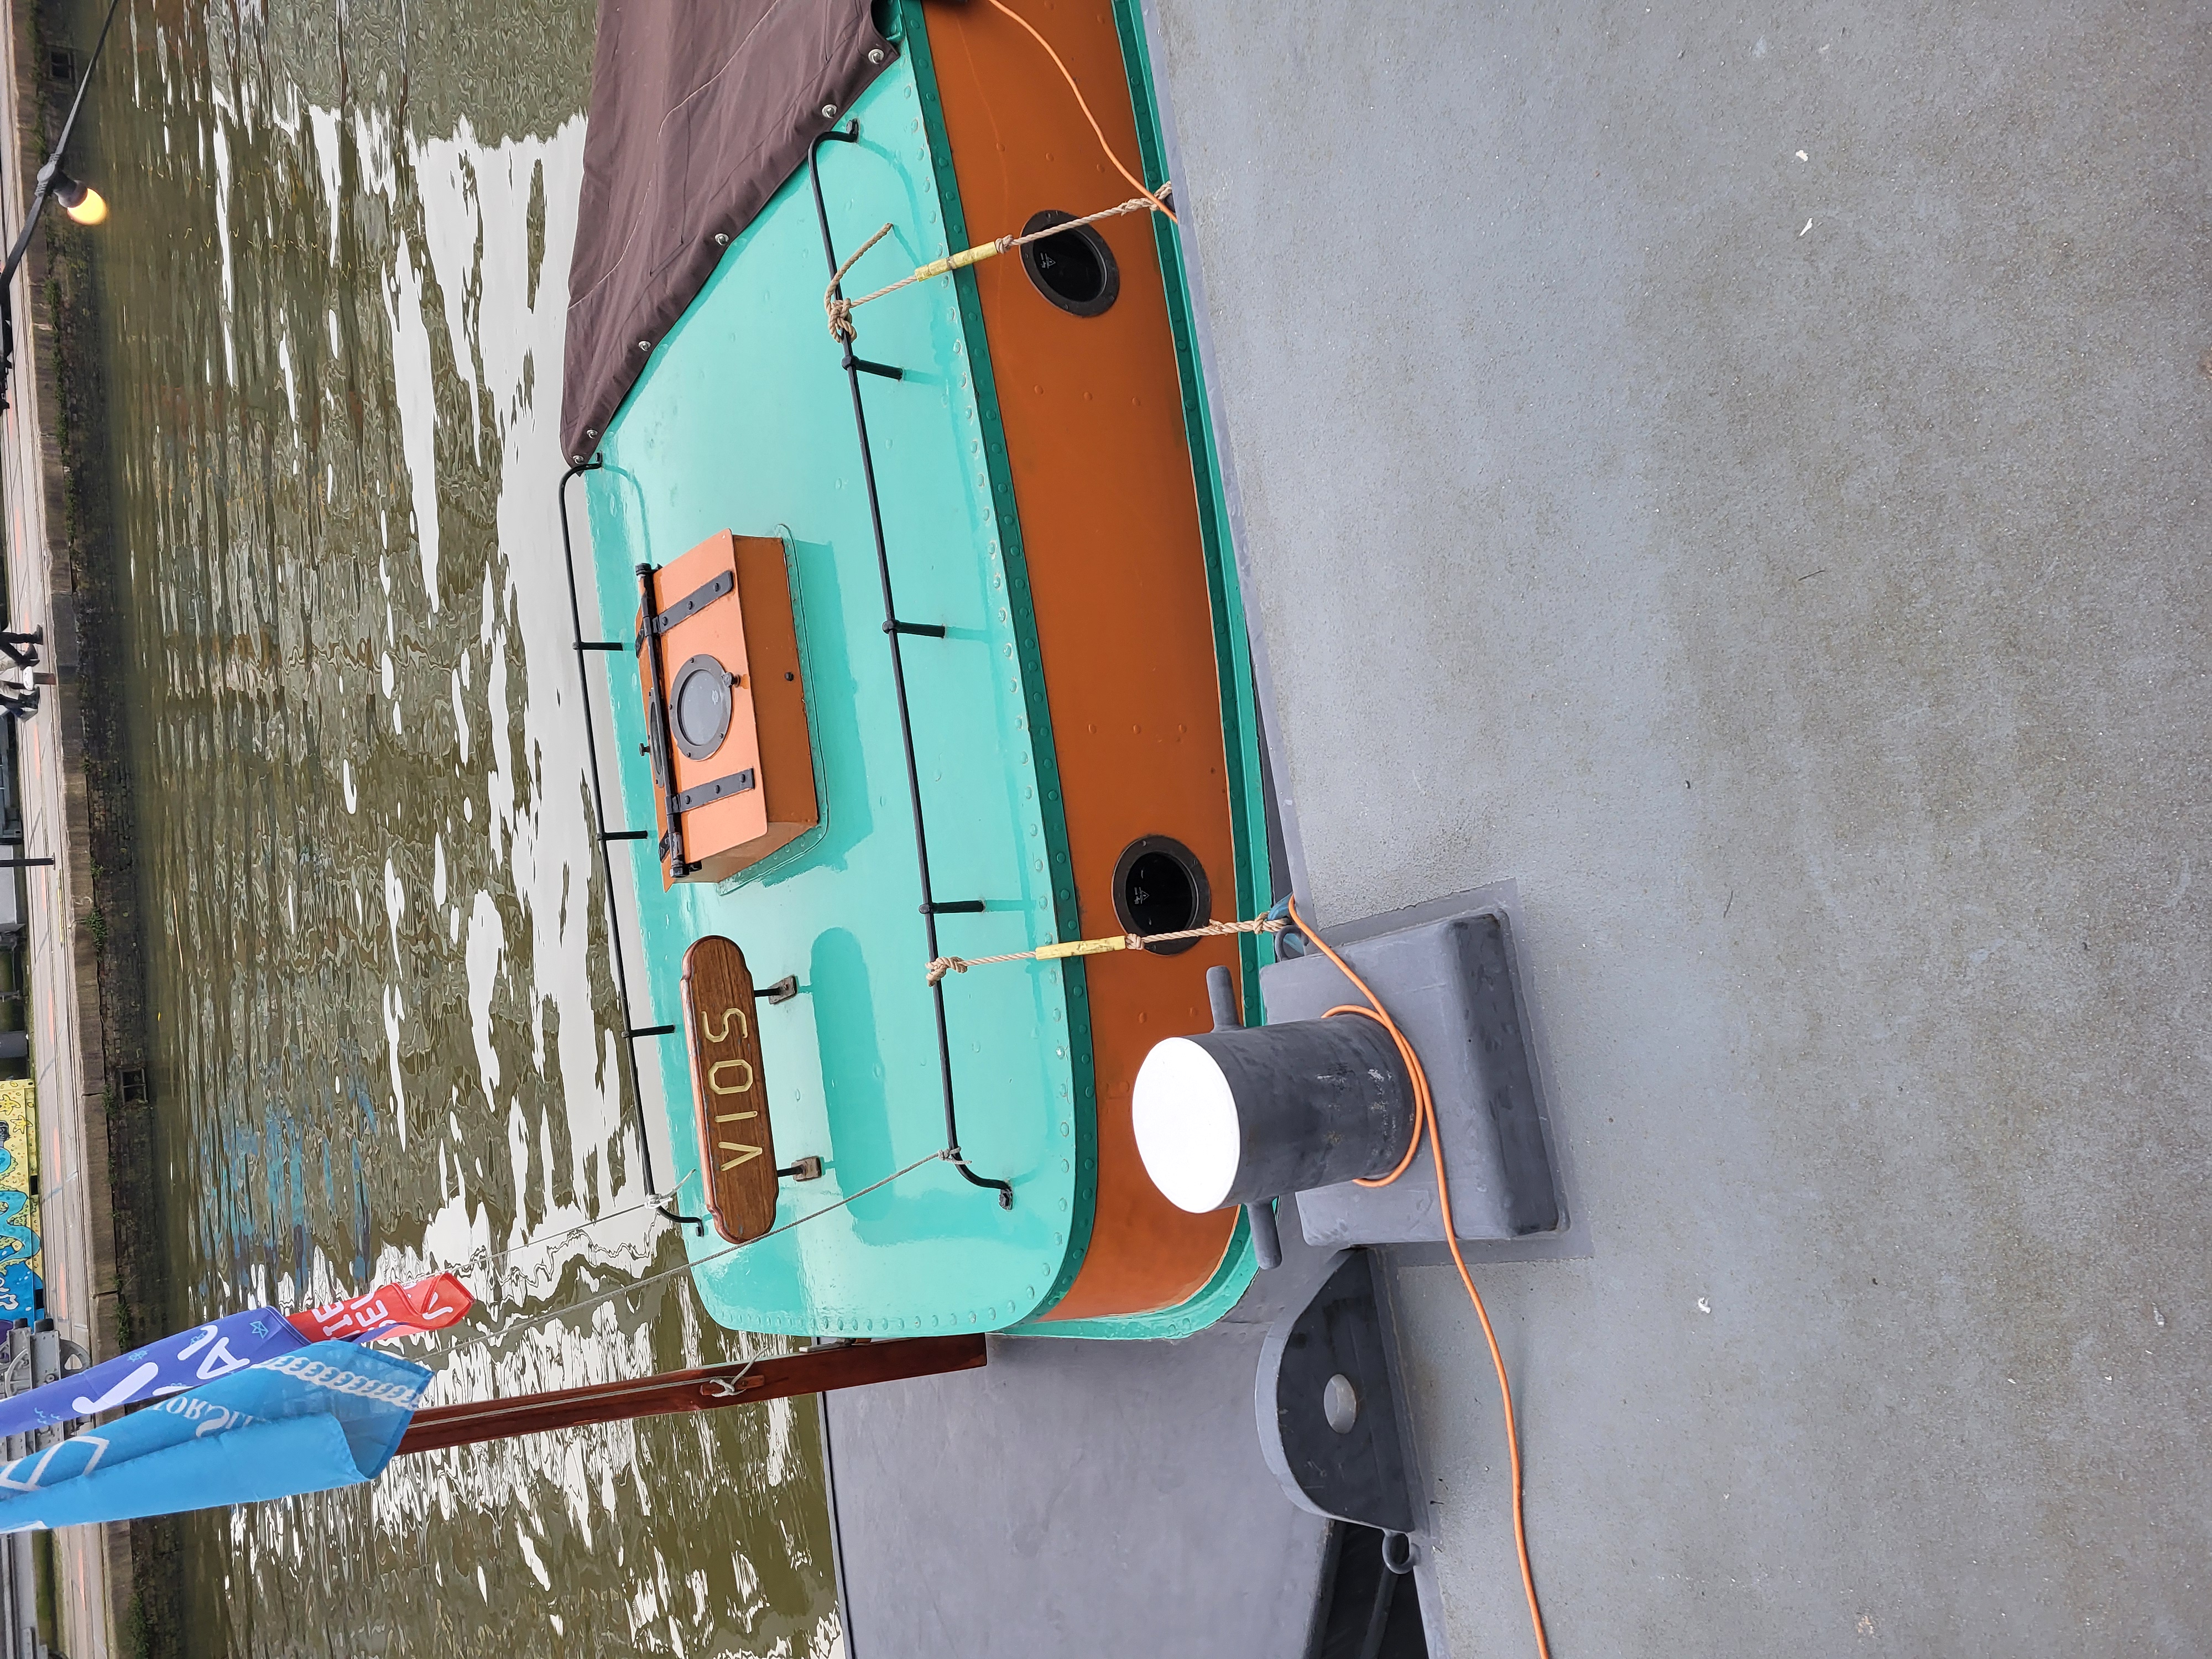 a photograph of a small orange and teal boat in a river.